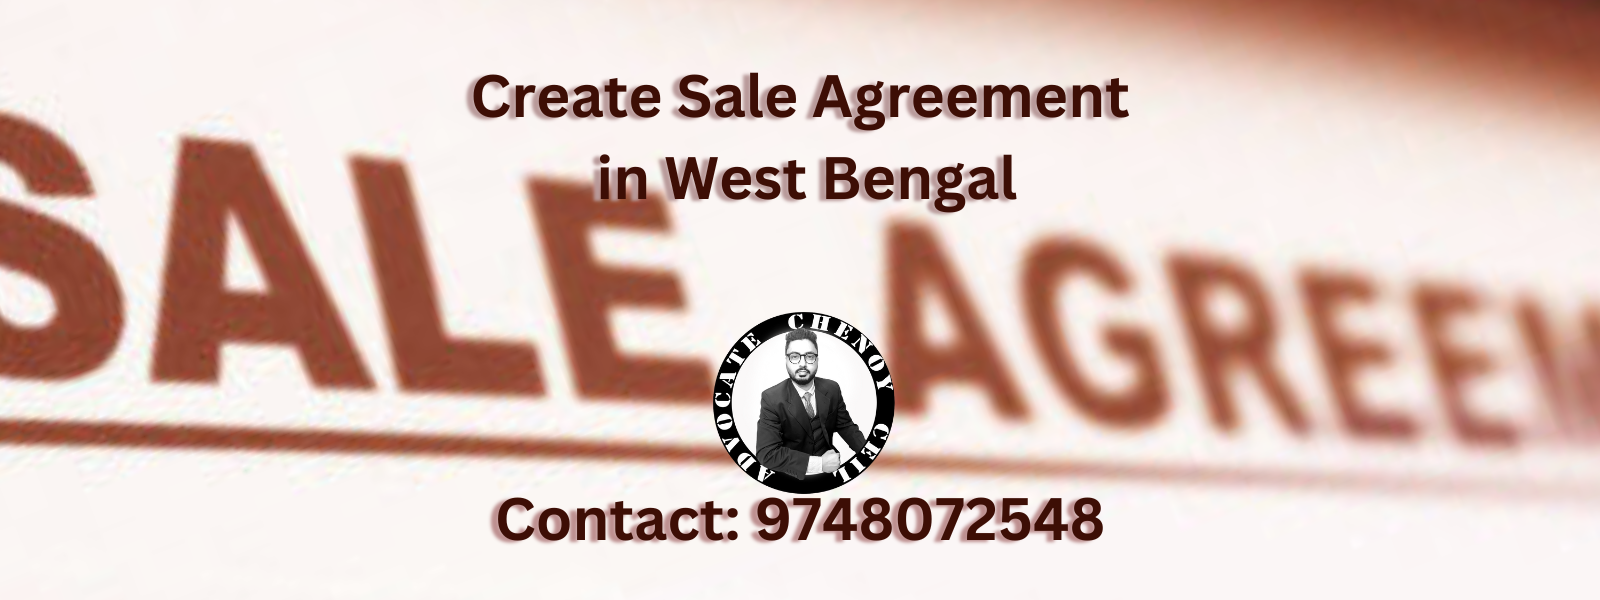 Sale Agreement in West Bengal